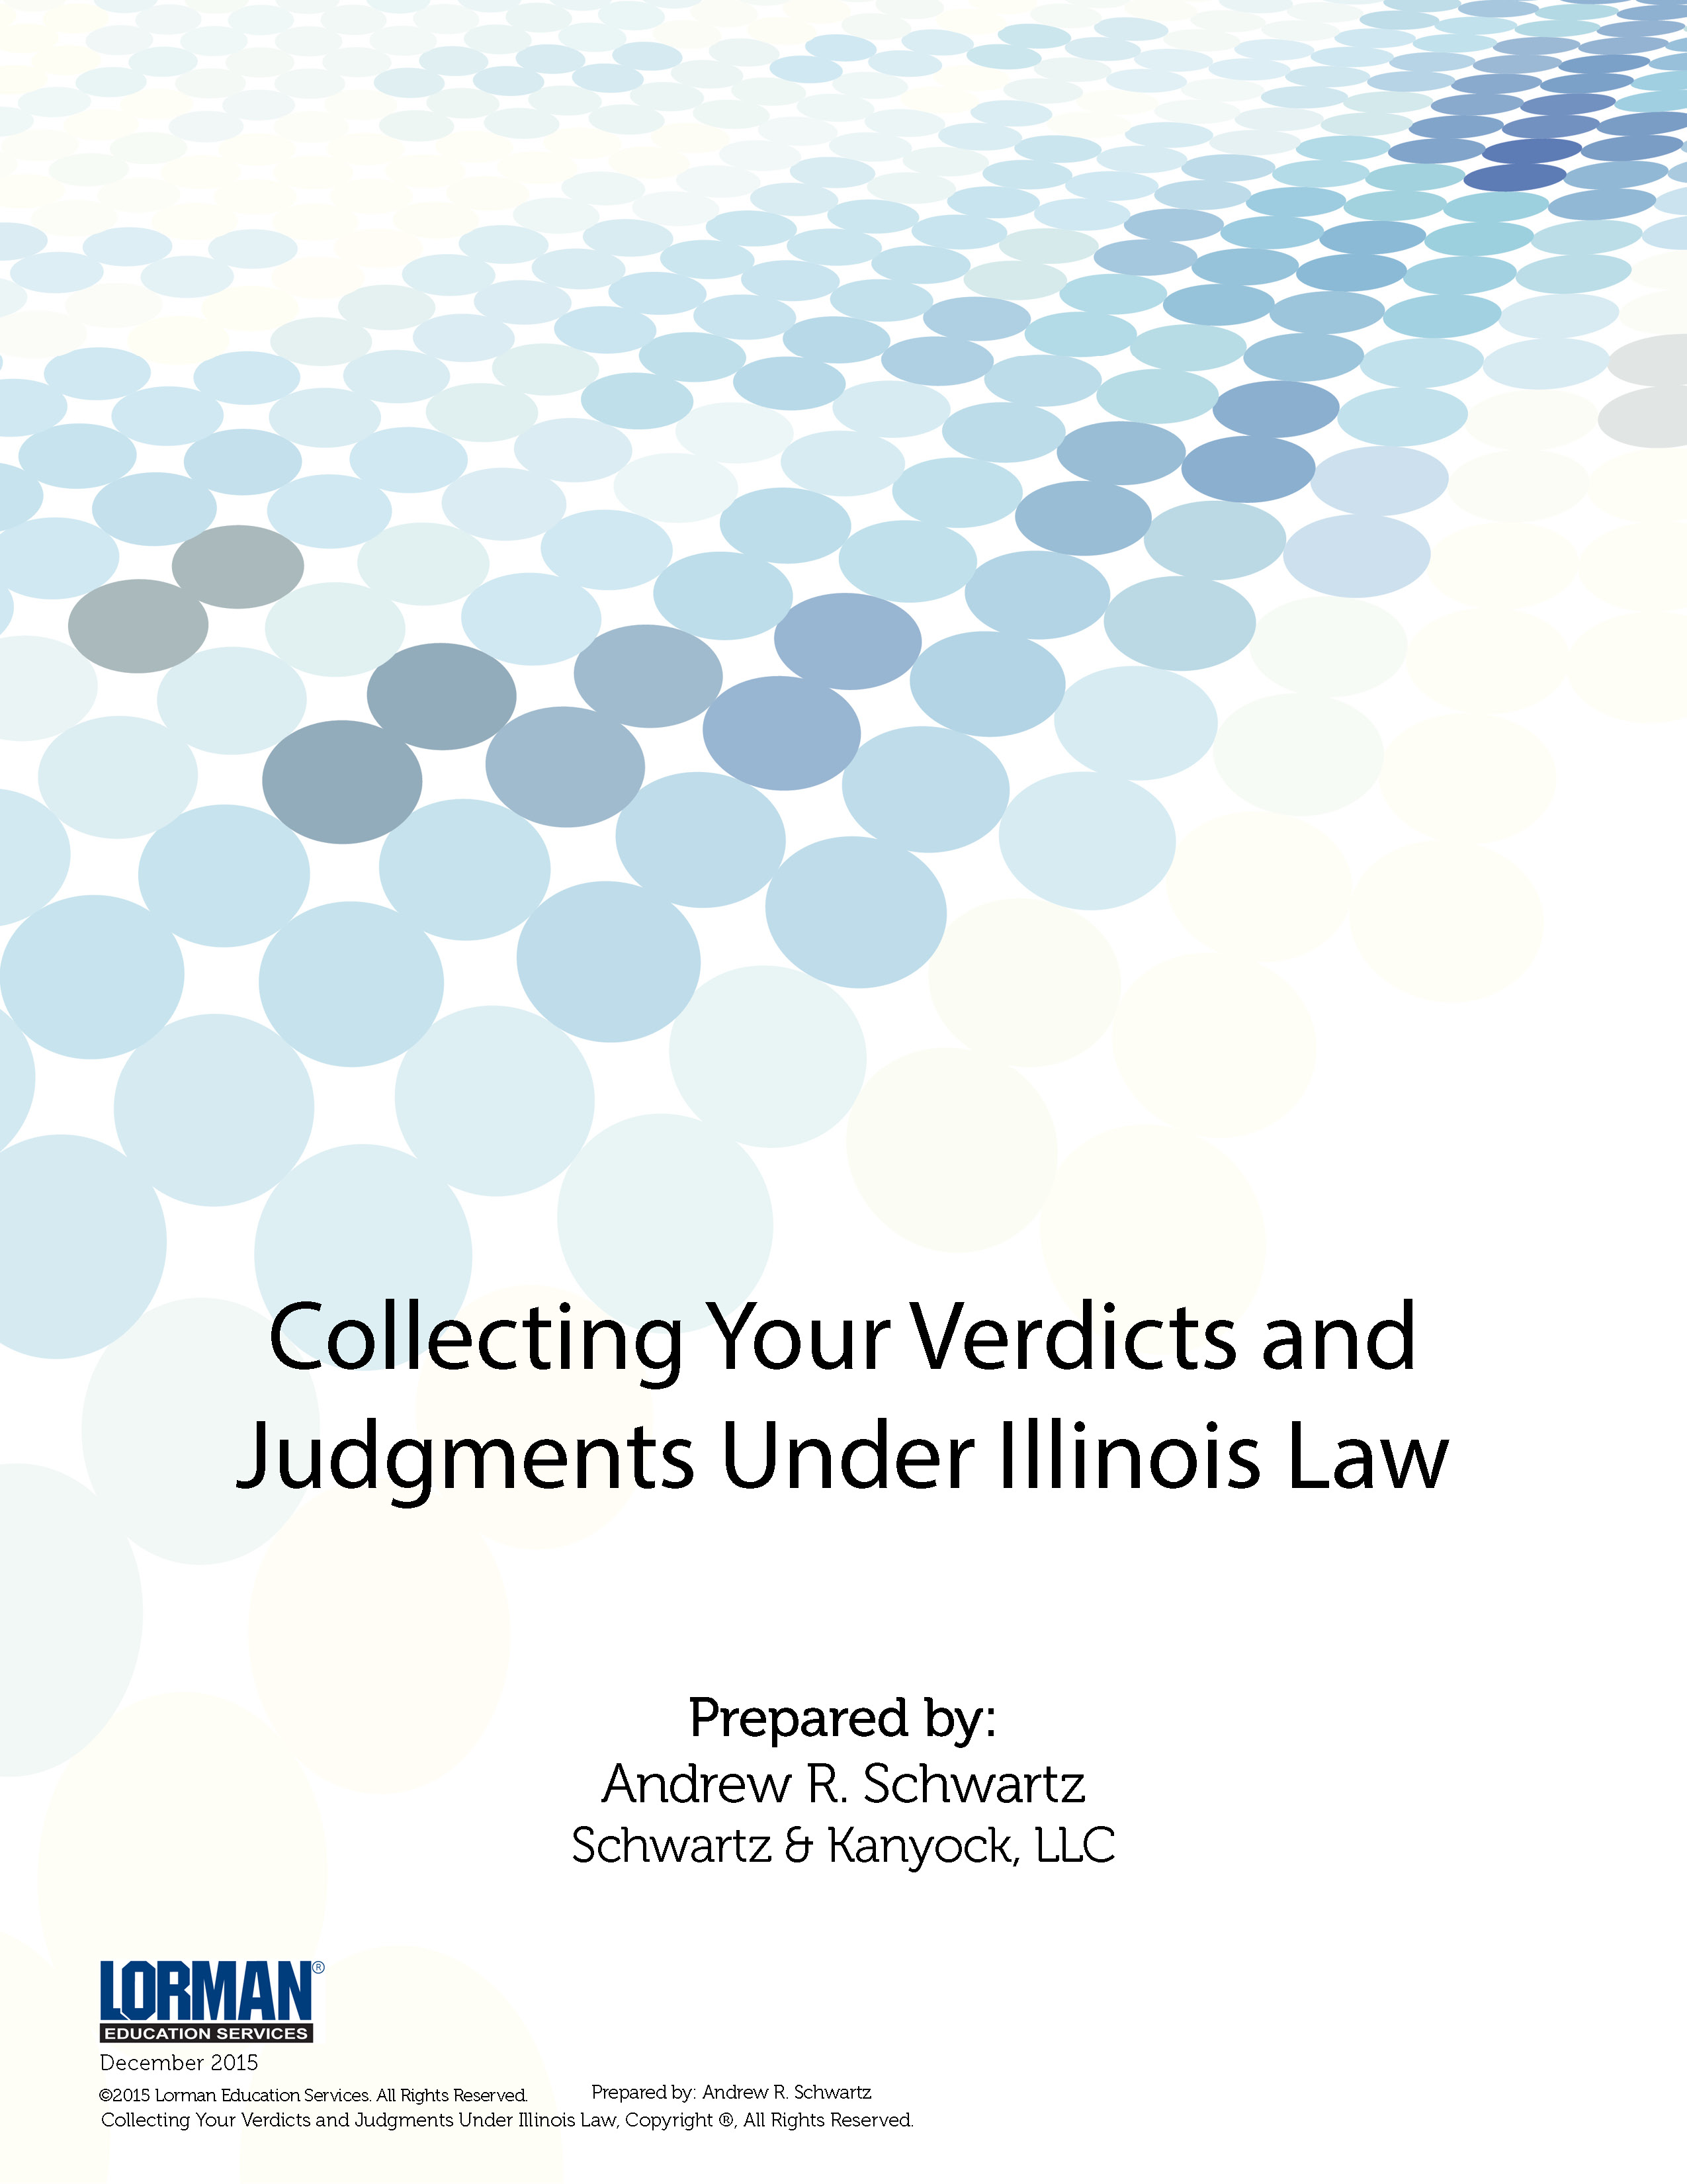 Collecting Your Verdicts and Judgments Under Illinois Law